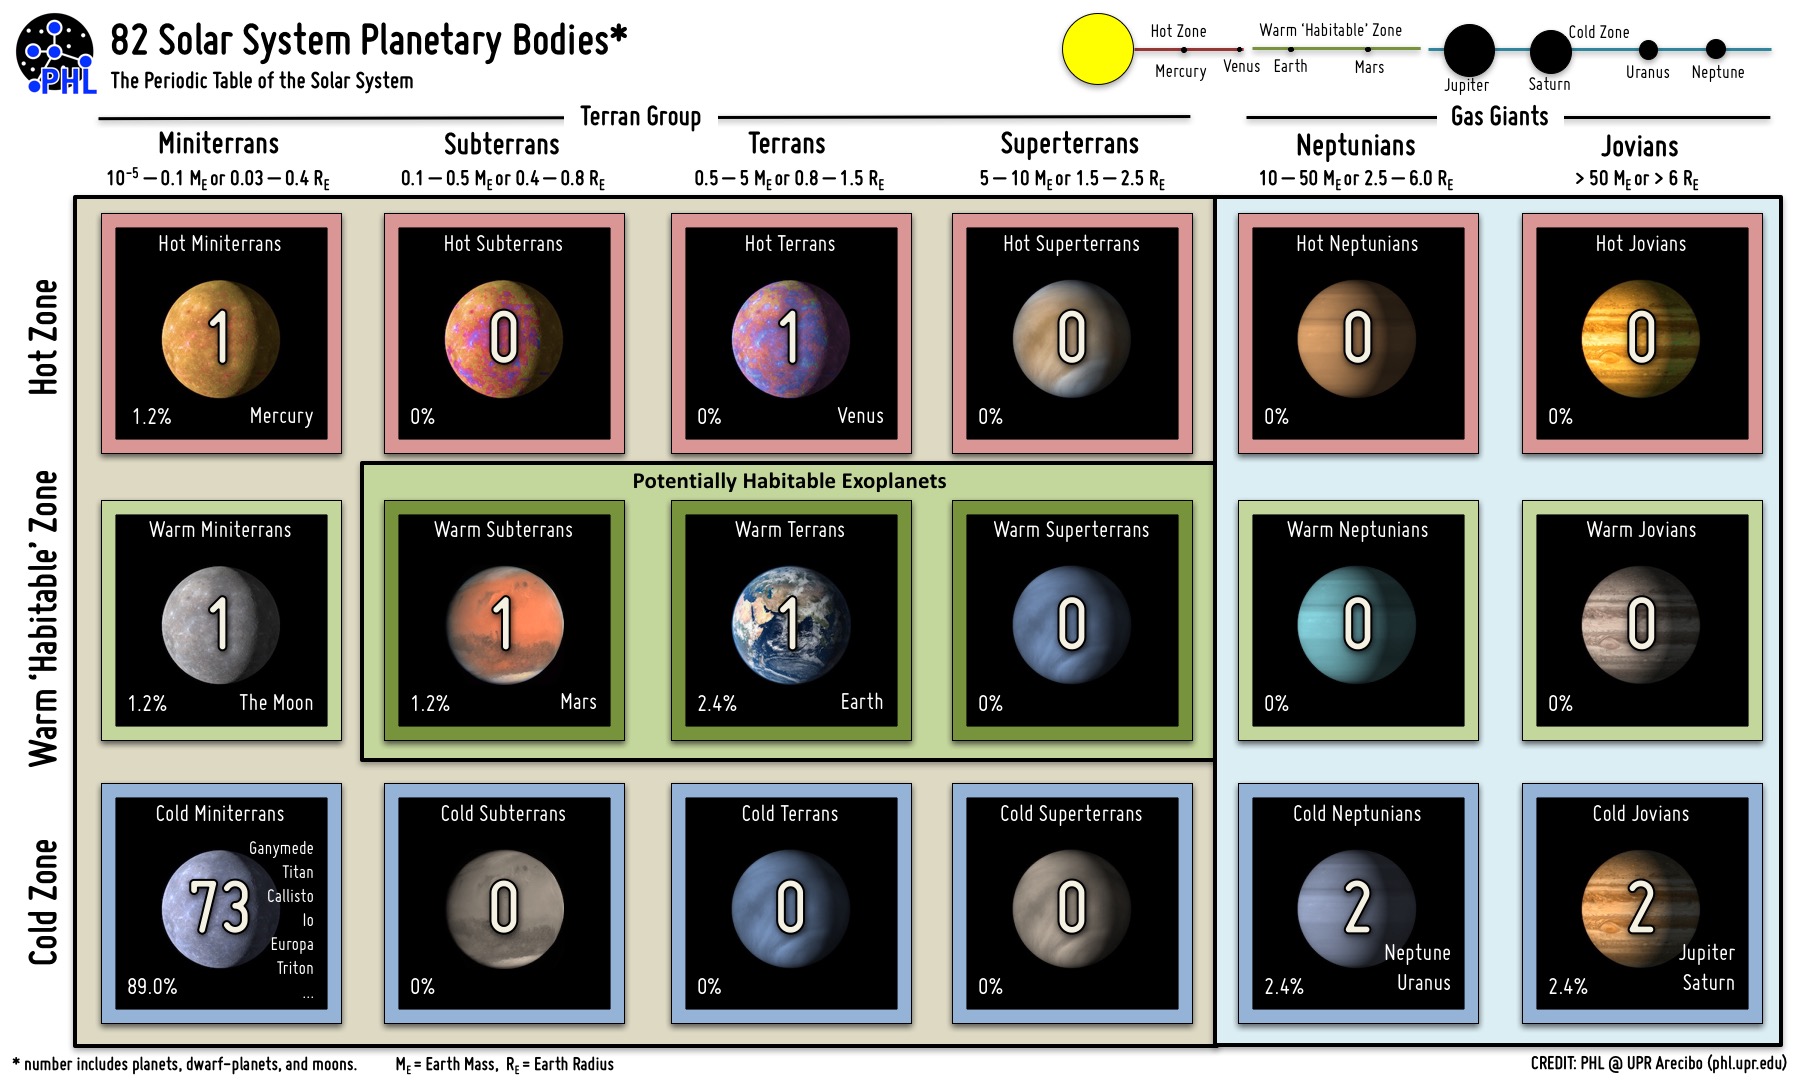 The periodic table of the Solar System objects (planets, moon, dwarf planets, and trans-Neptunian objects). Sizes of objects increase from left to right and the temperatures of objects increase from bottom to top. In our Solar System the moons of Jovian planets, dwarf planets, and other trans-Neptunian objects heavily populate the cold zone of Miniterrans